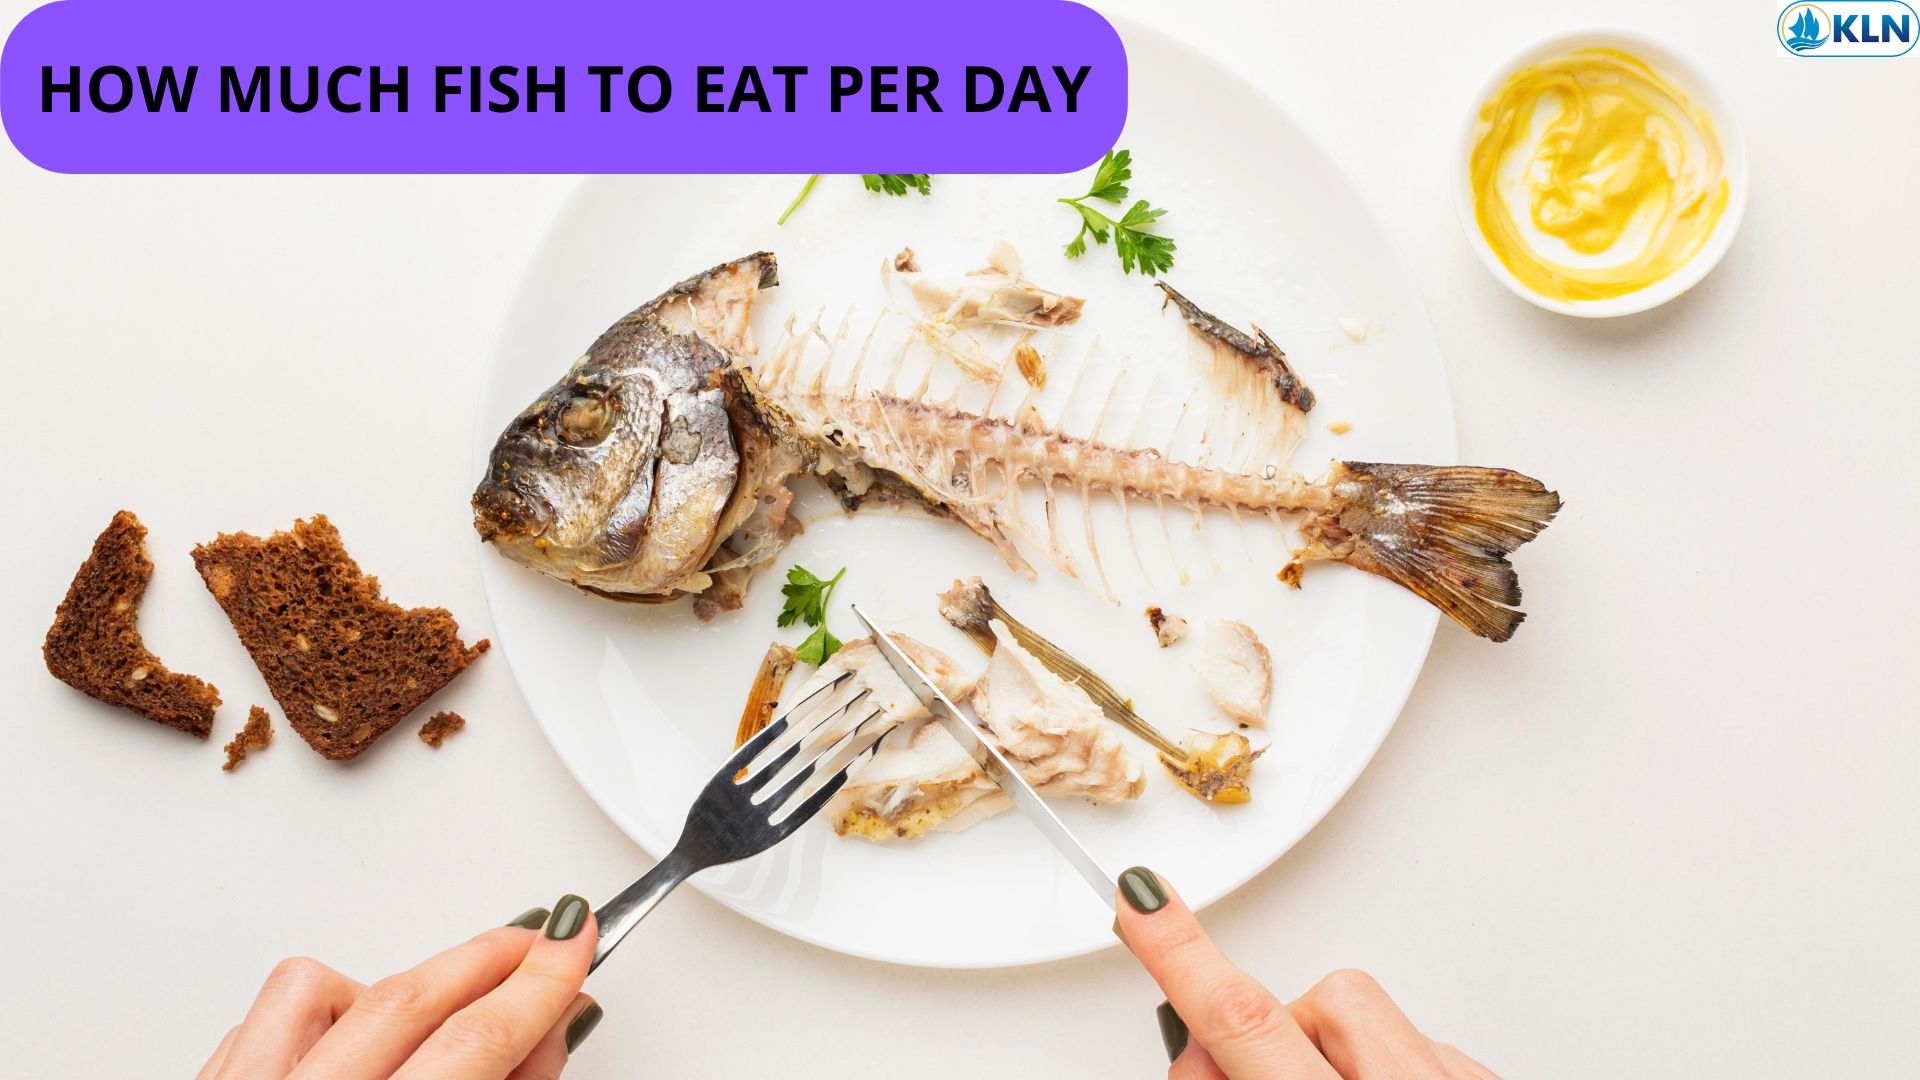 HOW MUCH FISH TO EAT PER DAY